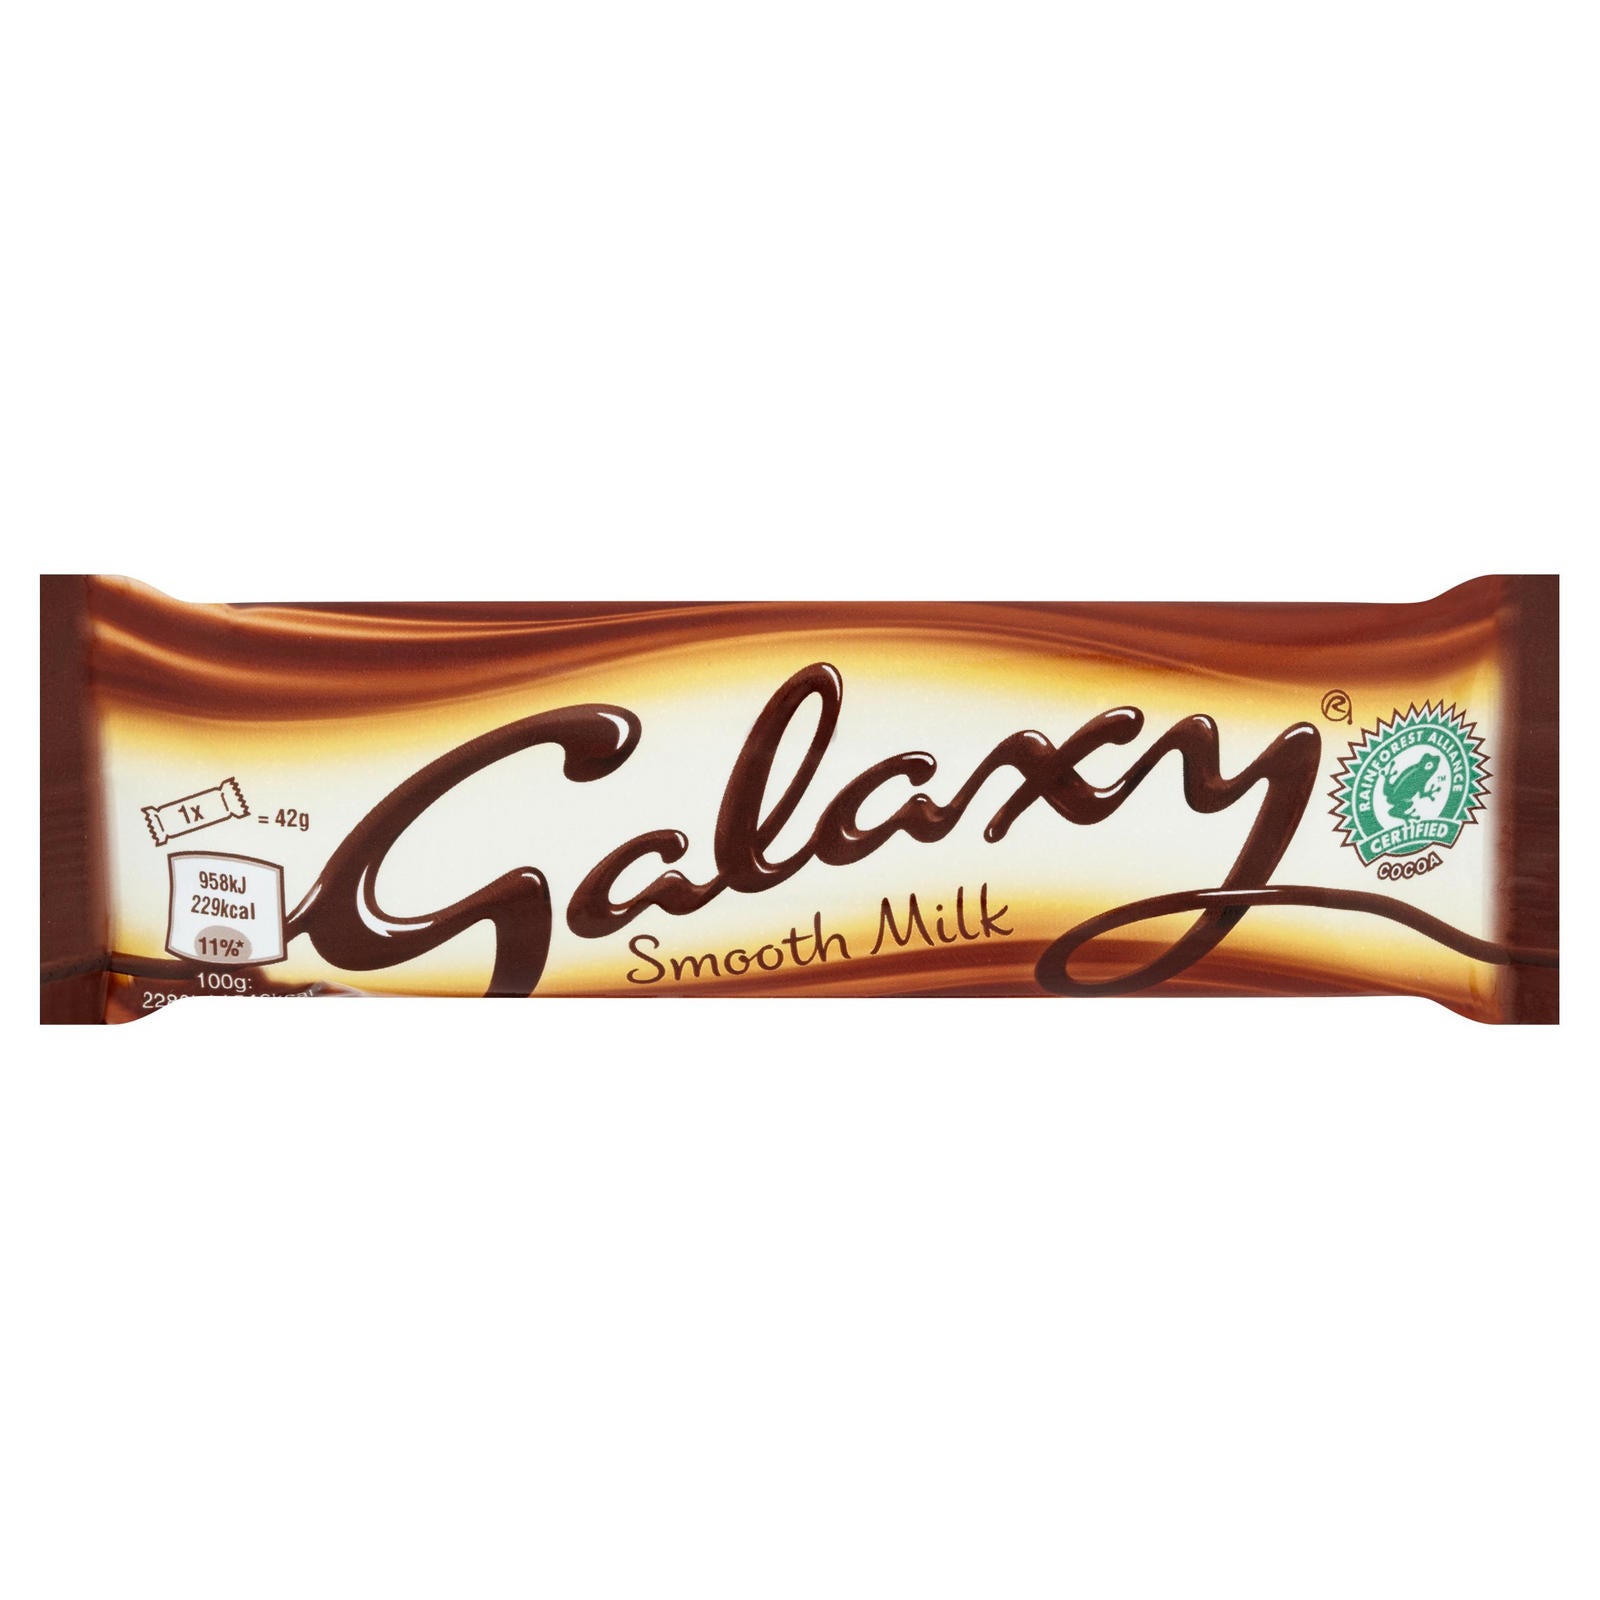 Galaxy Smooth Milk Chocolate 42g - REDUCED TO CLEAR - BBE 10/03/24